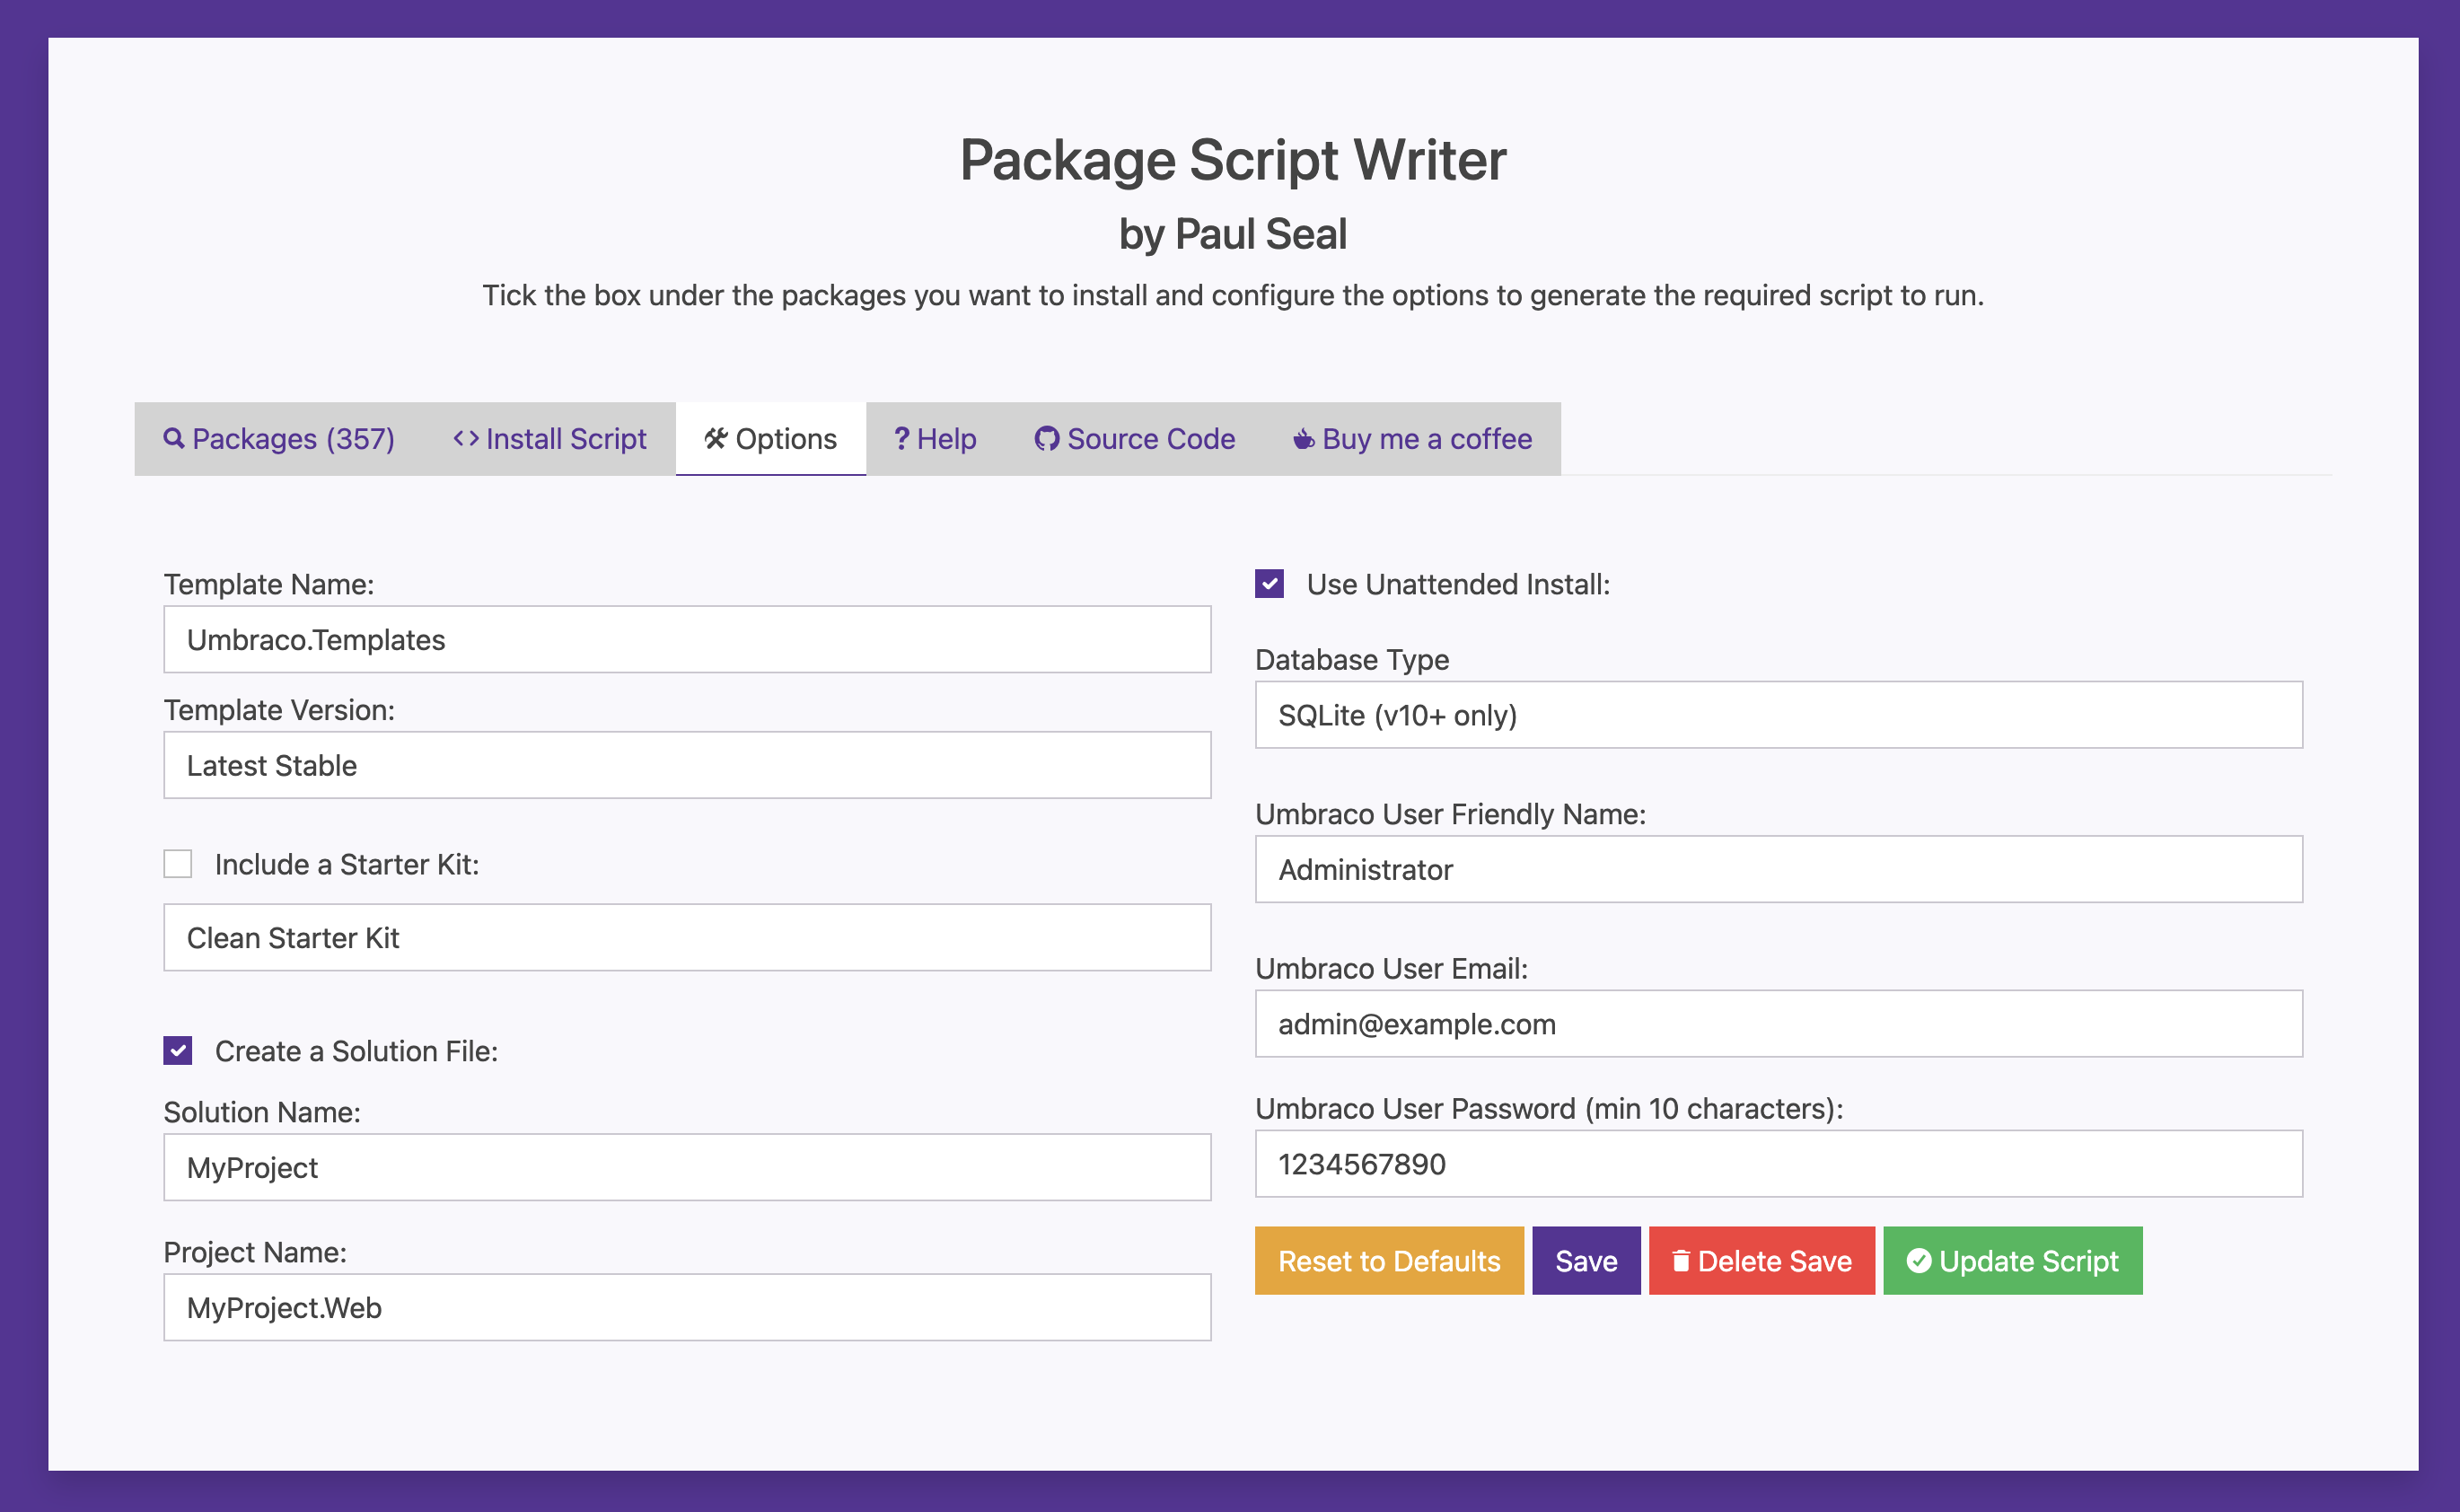 Package Script Writter from Paul Seal